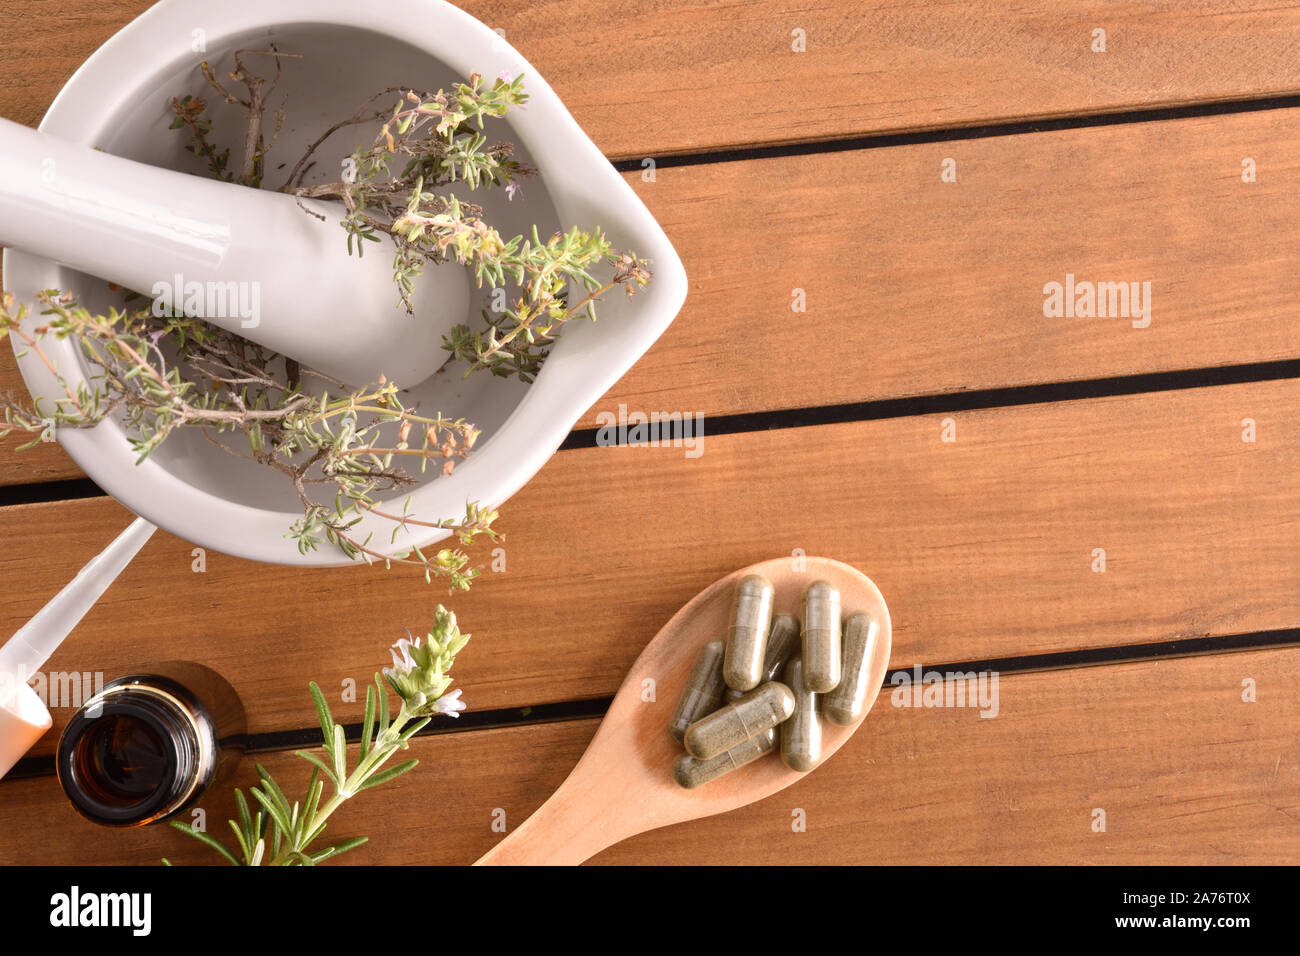 Homemade elaboration of natural medicines with capsules and mortar with plants on wooden table. Alternative natural medicine concept. Top view. Horizo Stock Photo